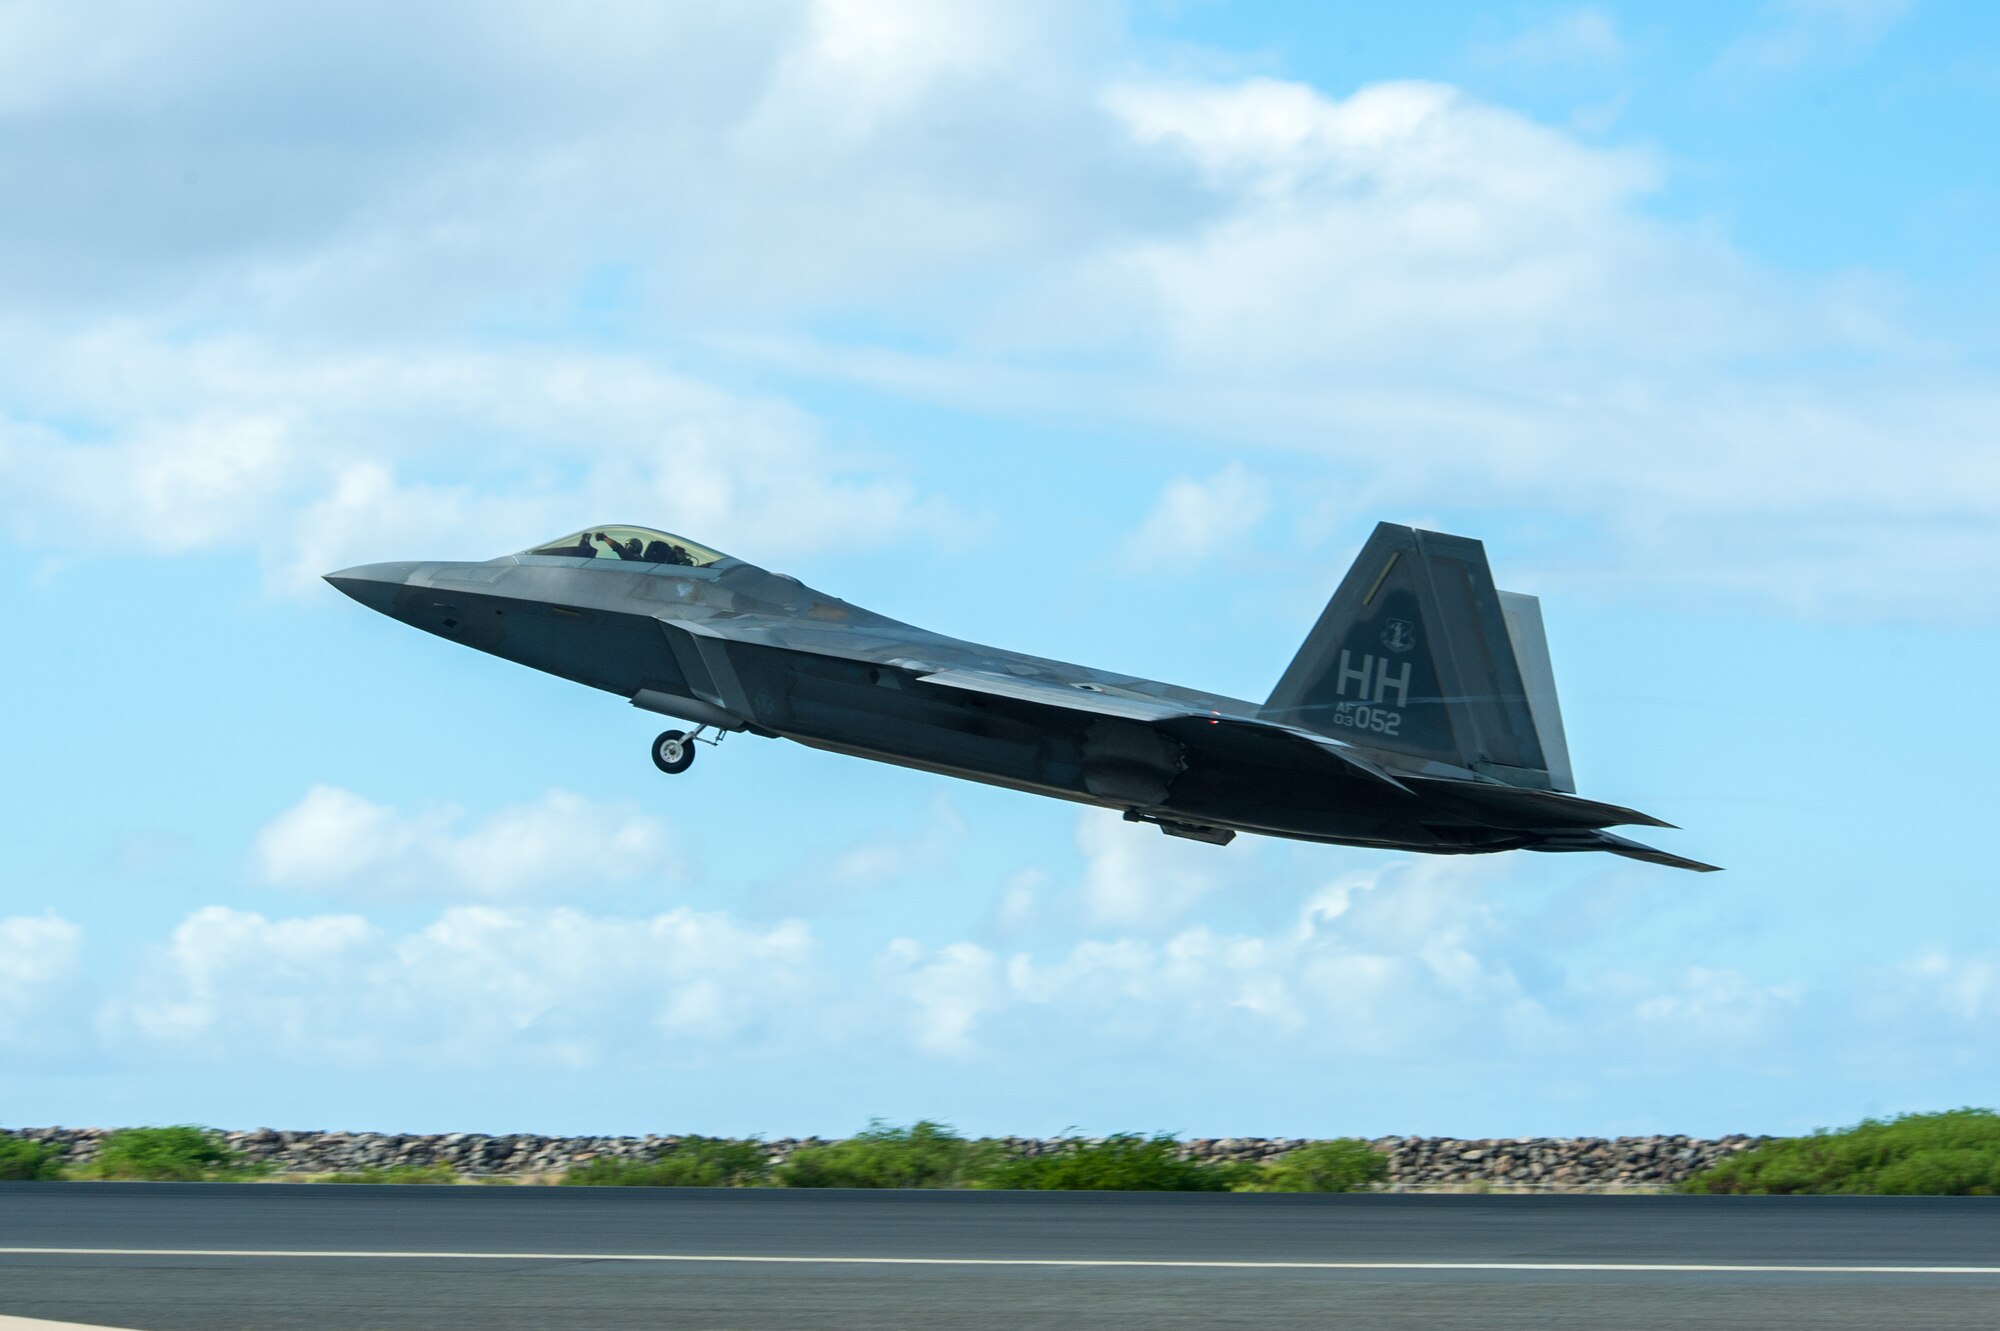 A Hawaii Air National Guard F-22 Raptor takes off at Joint Base Pearl Harbor-Hickam, Hawaii, Aug. 21, 2019 during fighter exercise Sentry Aloha 19-2.